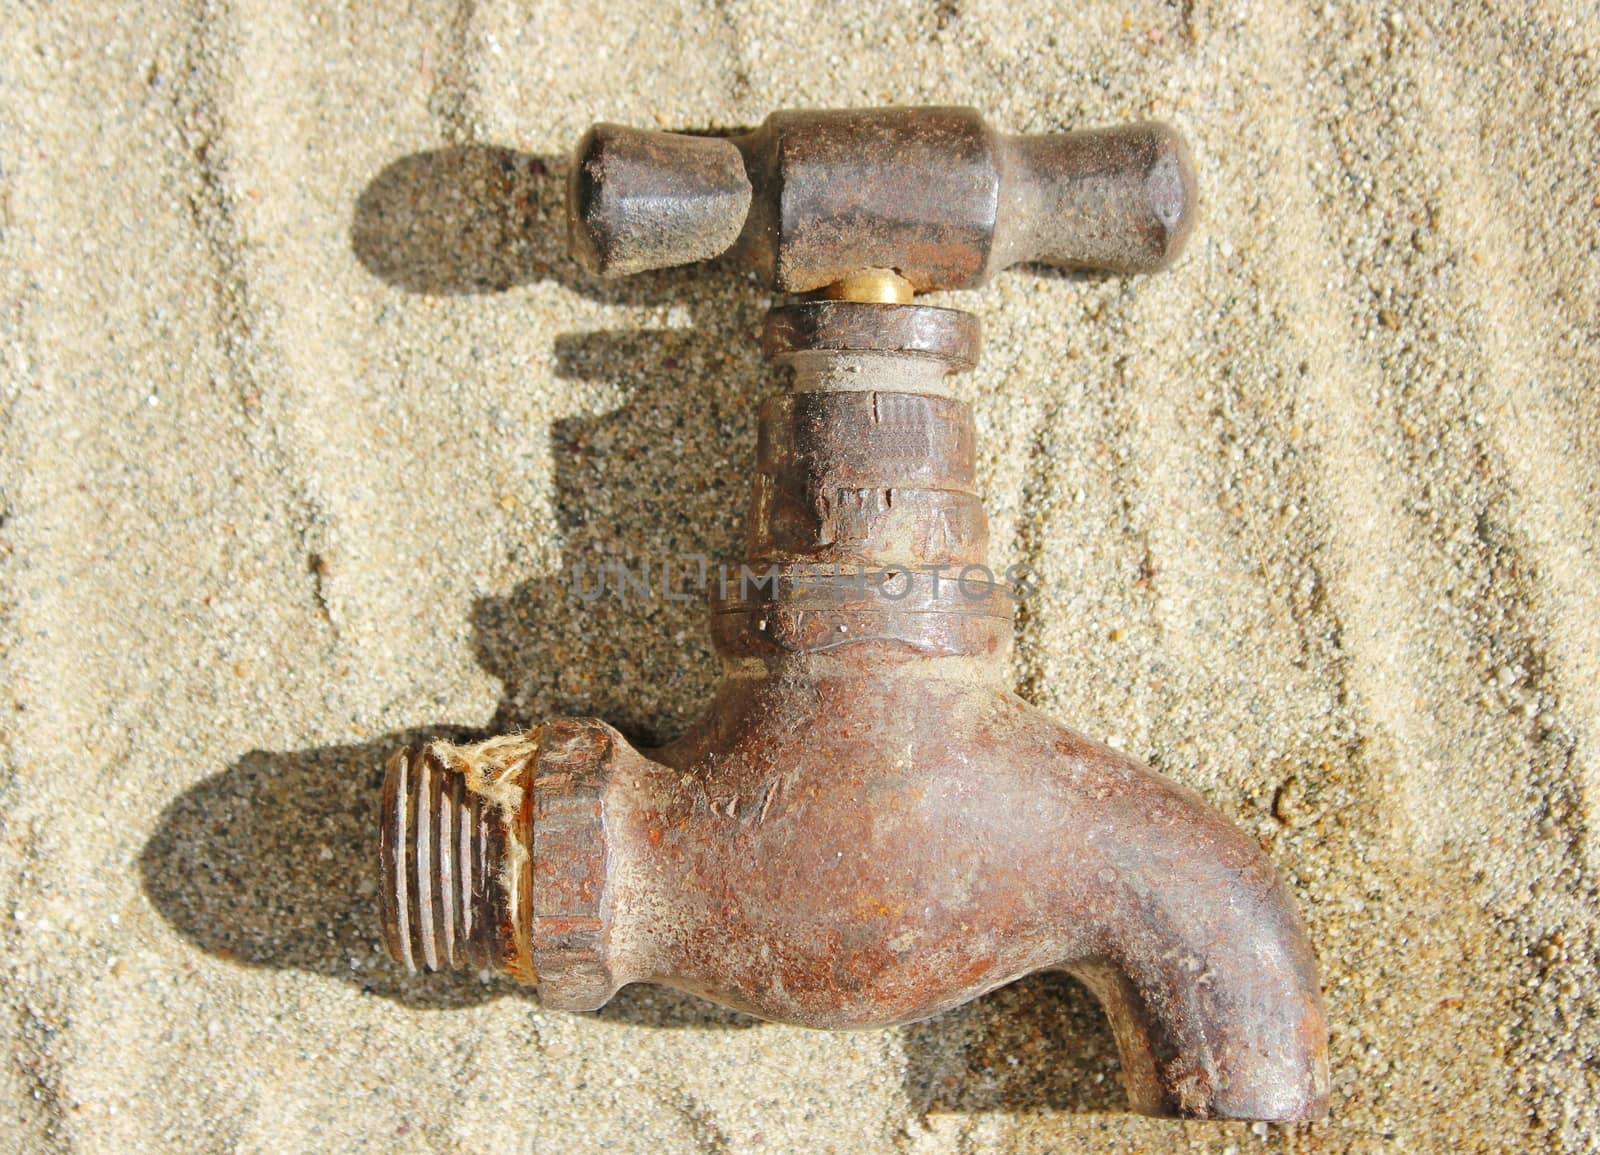 An old brass water tap or faucet, lying on sand. Ideal for use in water scarcity or save water concept.
